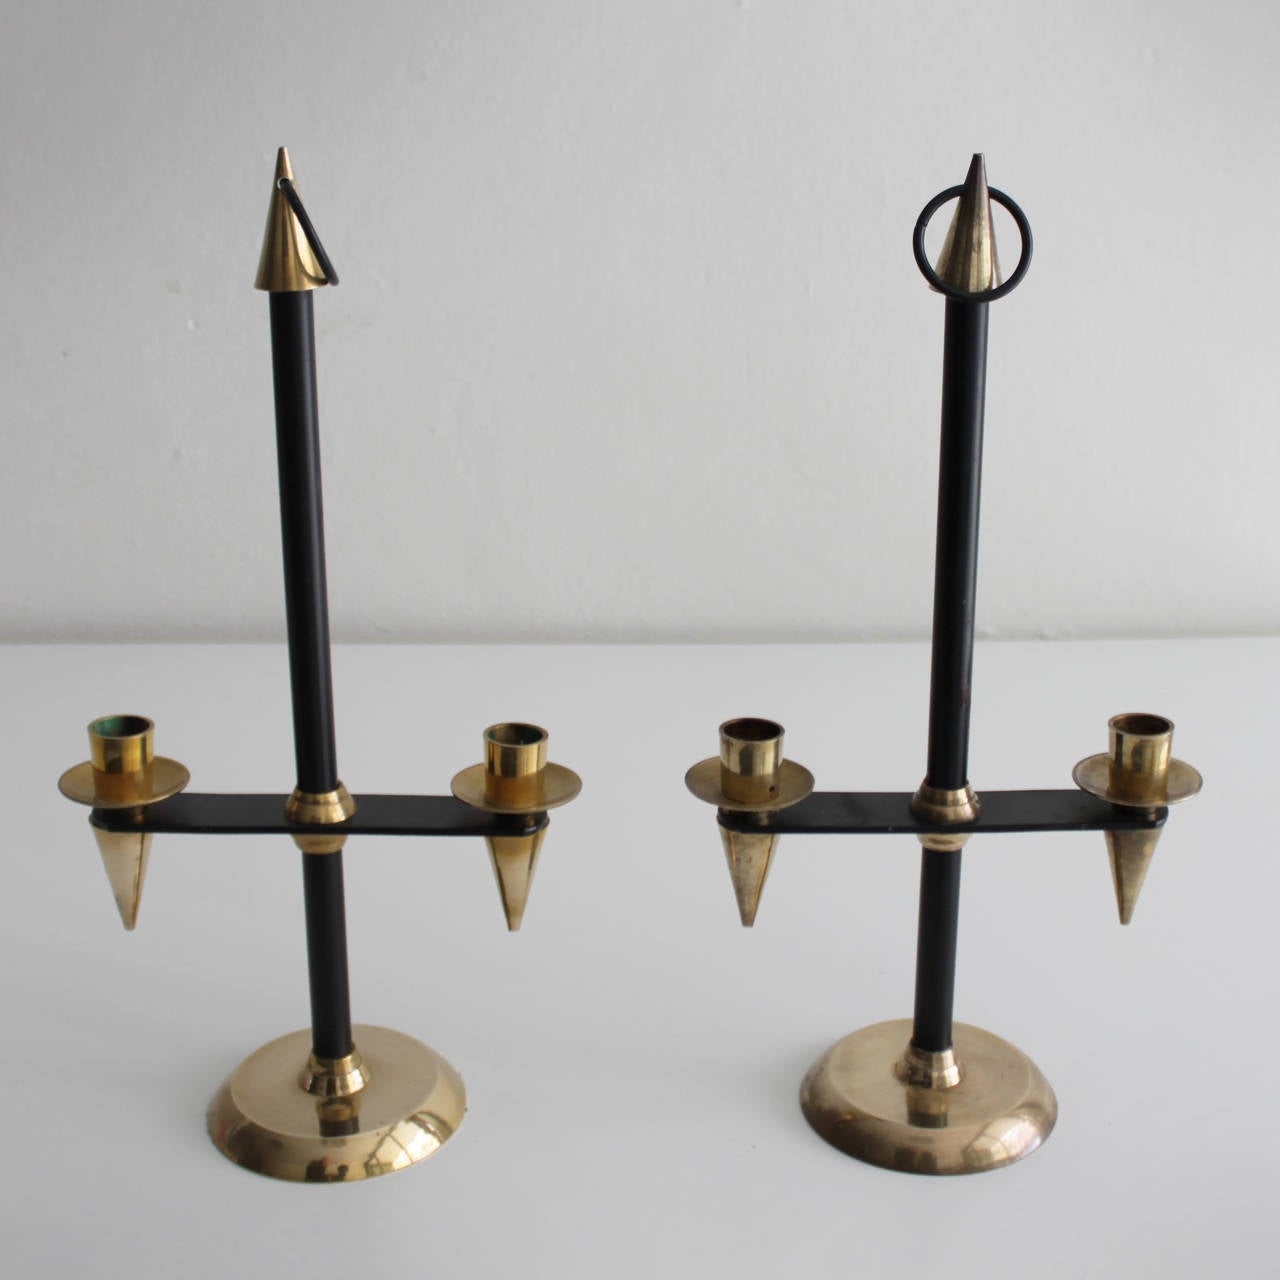 Pair of brass and black enameled candlesticks attributed to Gio Ponti, Italy.